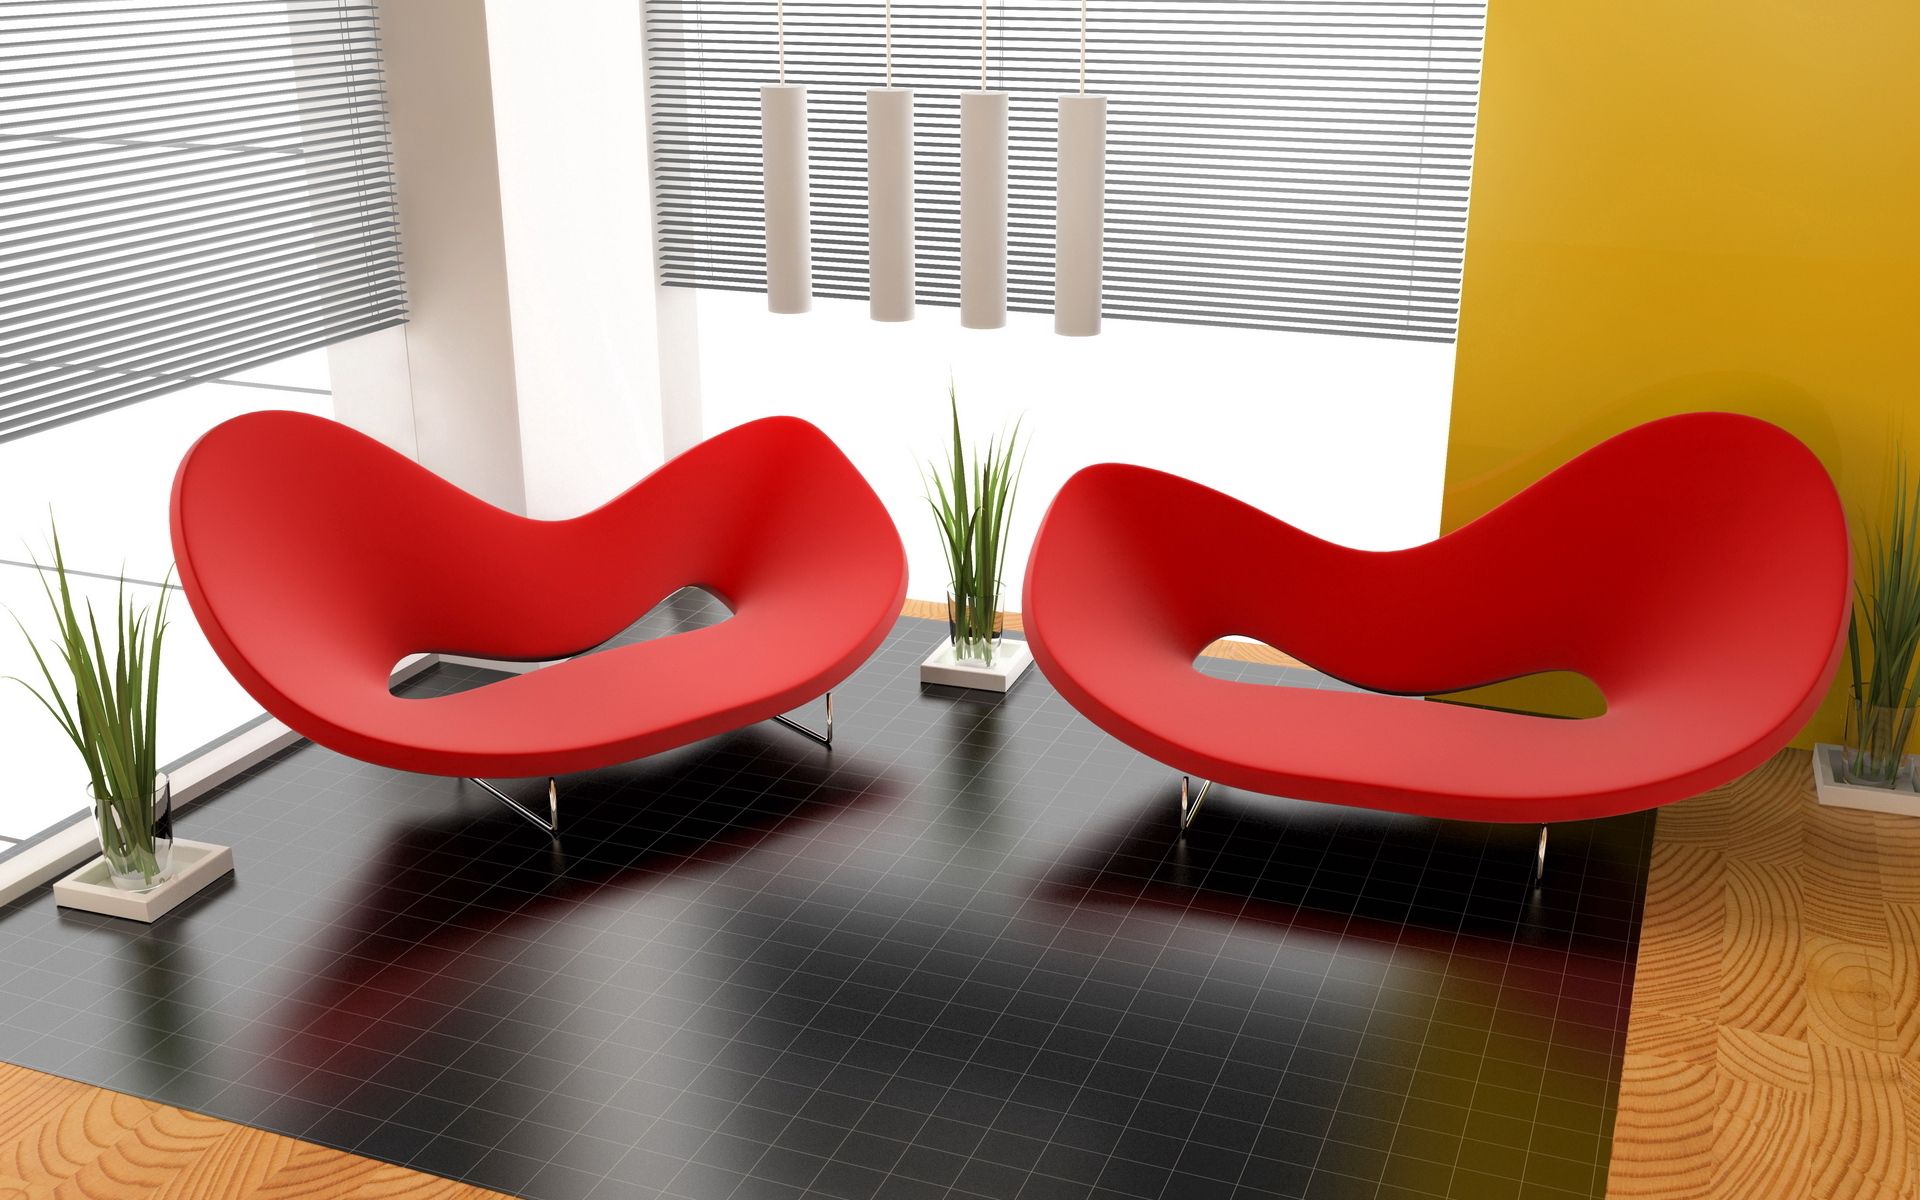 form, flat, plants, interior, red, miscellanea, miscellaneous, design, forms, room, style, armchair, apartment